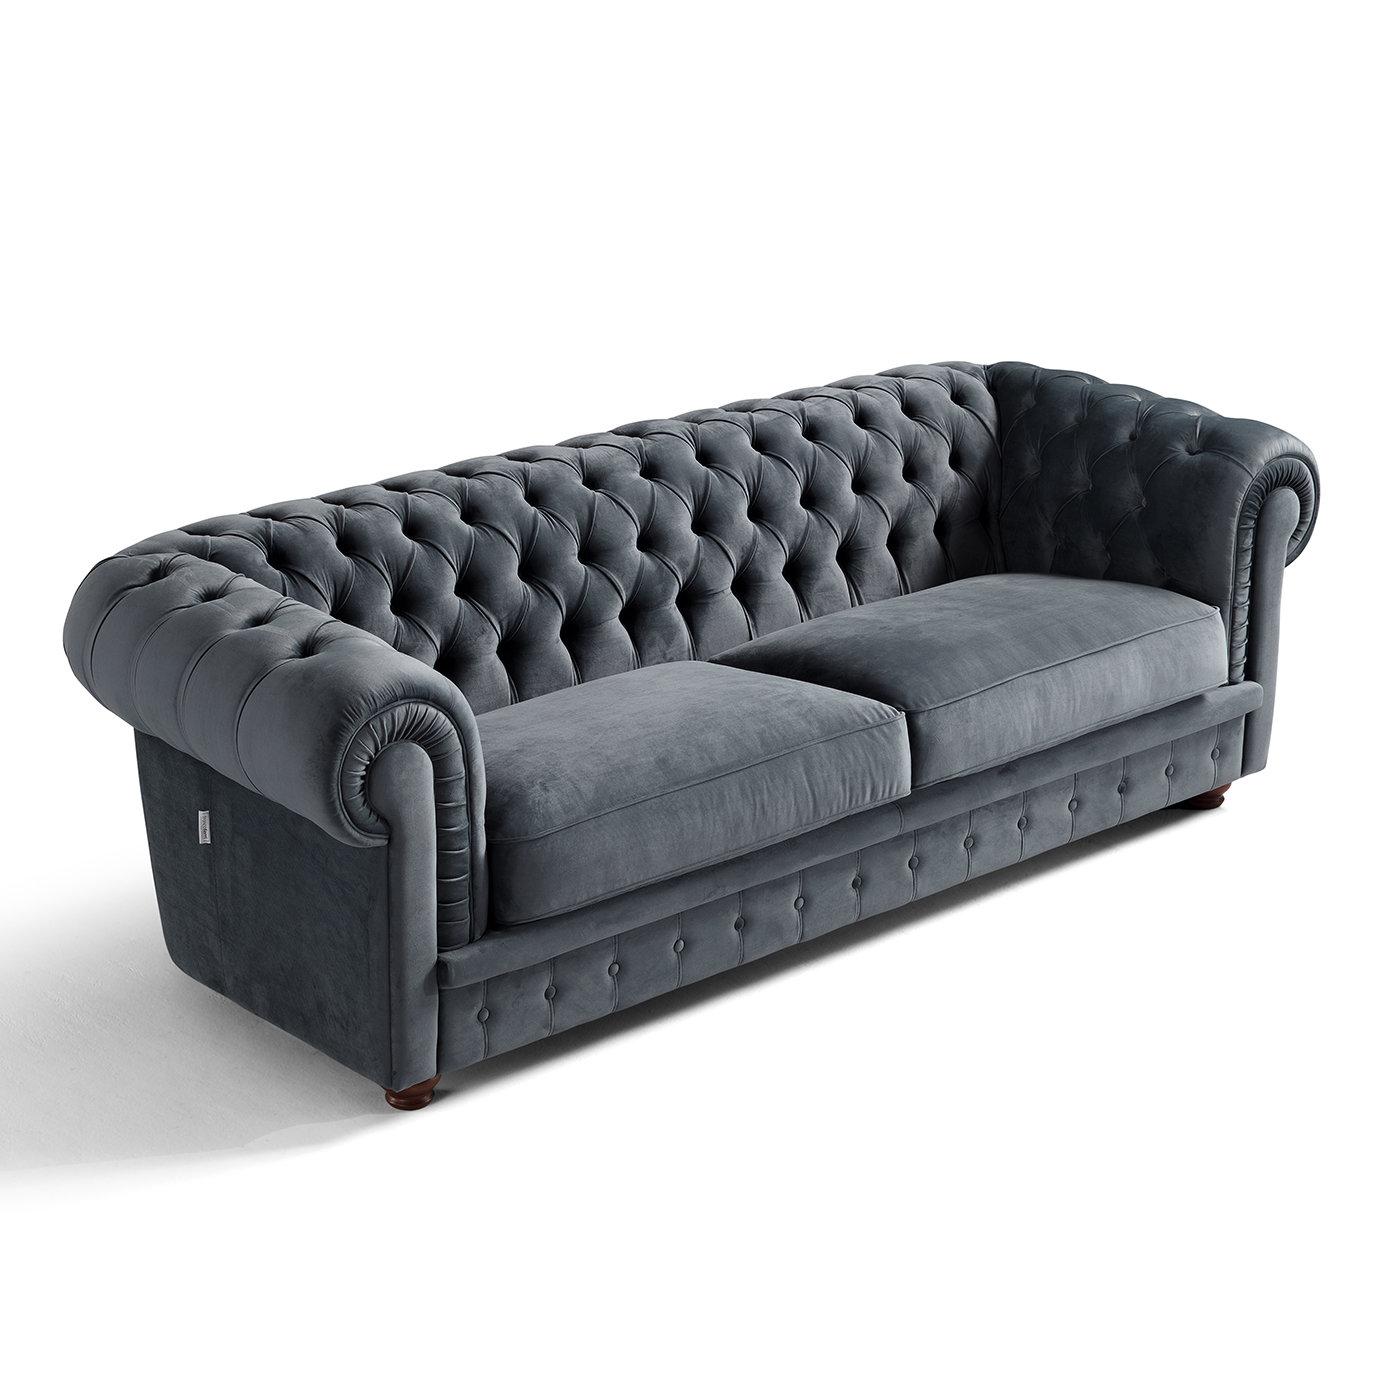 A stylish example of a Chesterfield-style sofa, this design covered in deep green fabric is distinguished by an alluring personality, showcasing a detailed aesthetic of great sophistication. A captivating button tufting graces the inner side of the